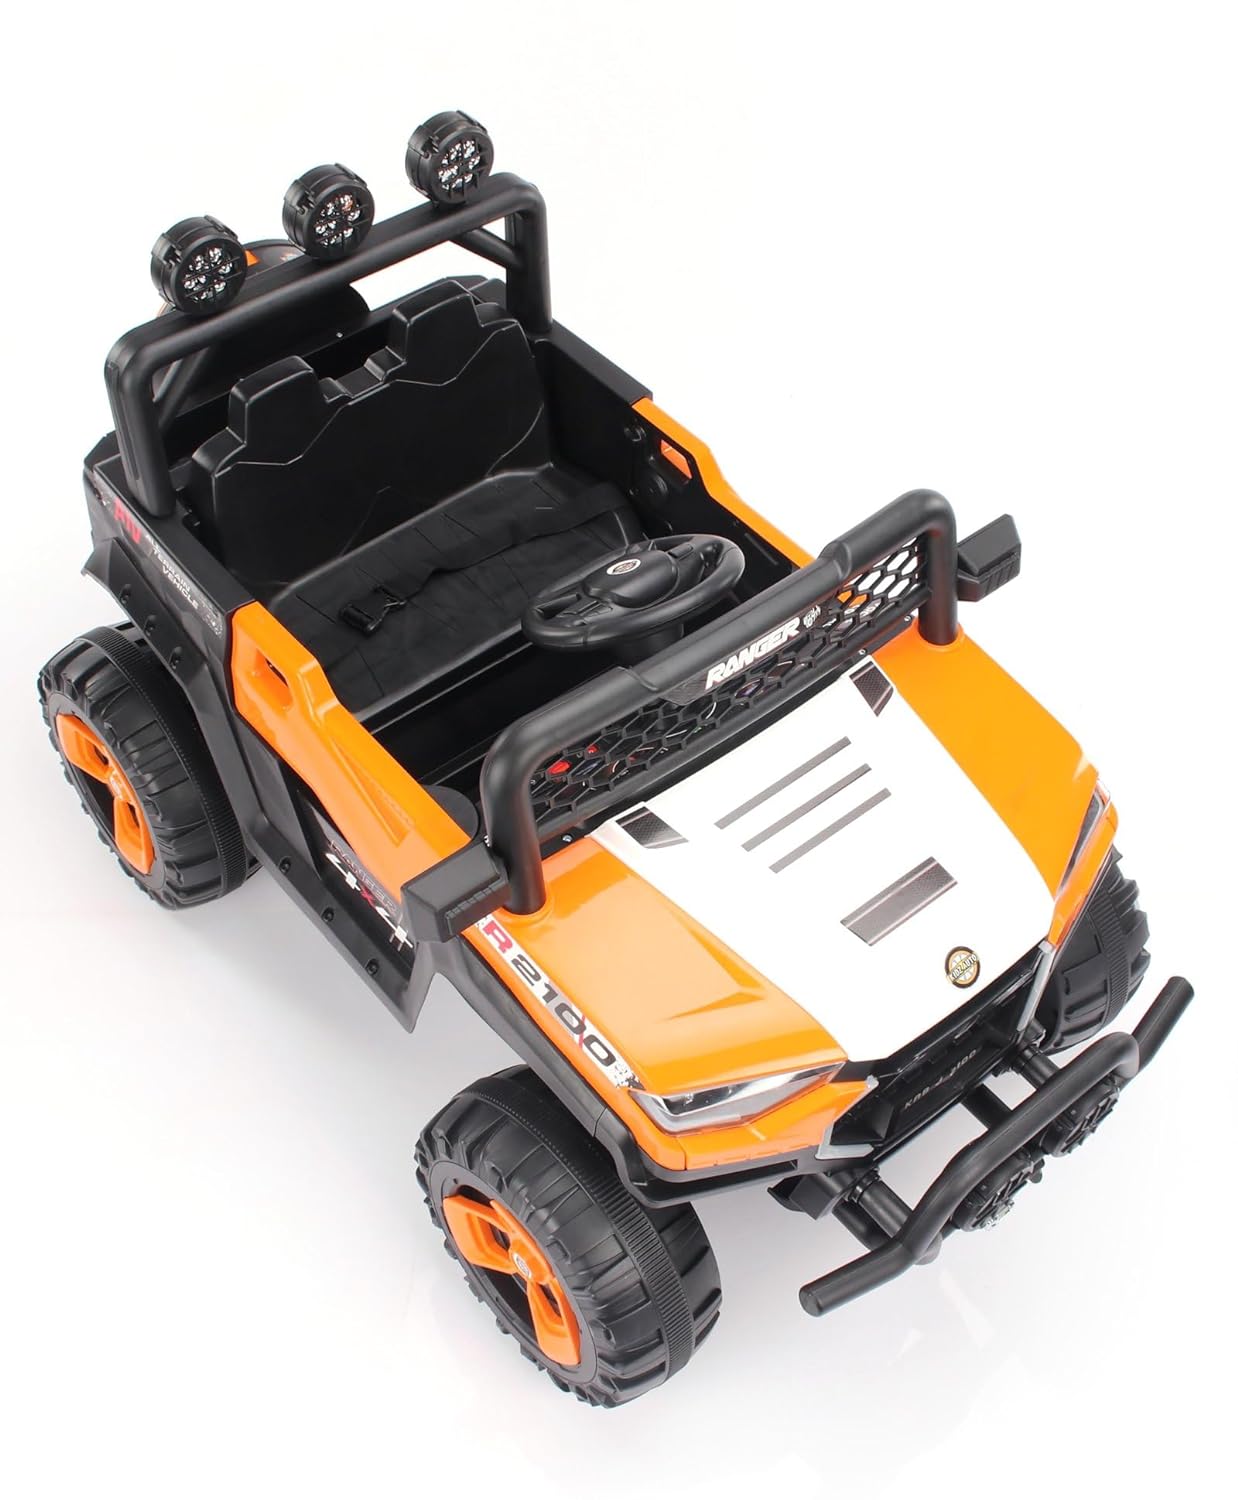 AYAAN TOYS Electric 4x4 Jeep Ride-On for Kids Ages 1-8 | Remote & Manual Steering | Orange